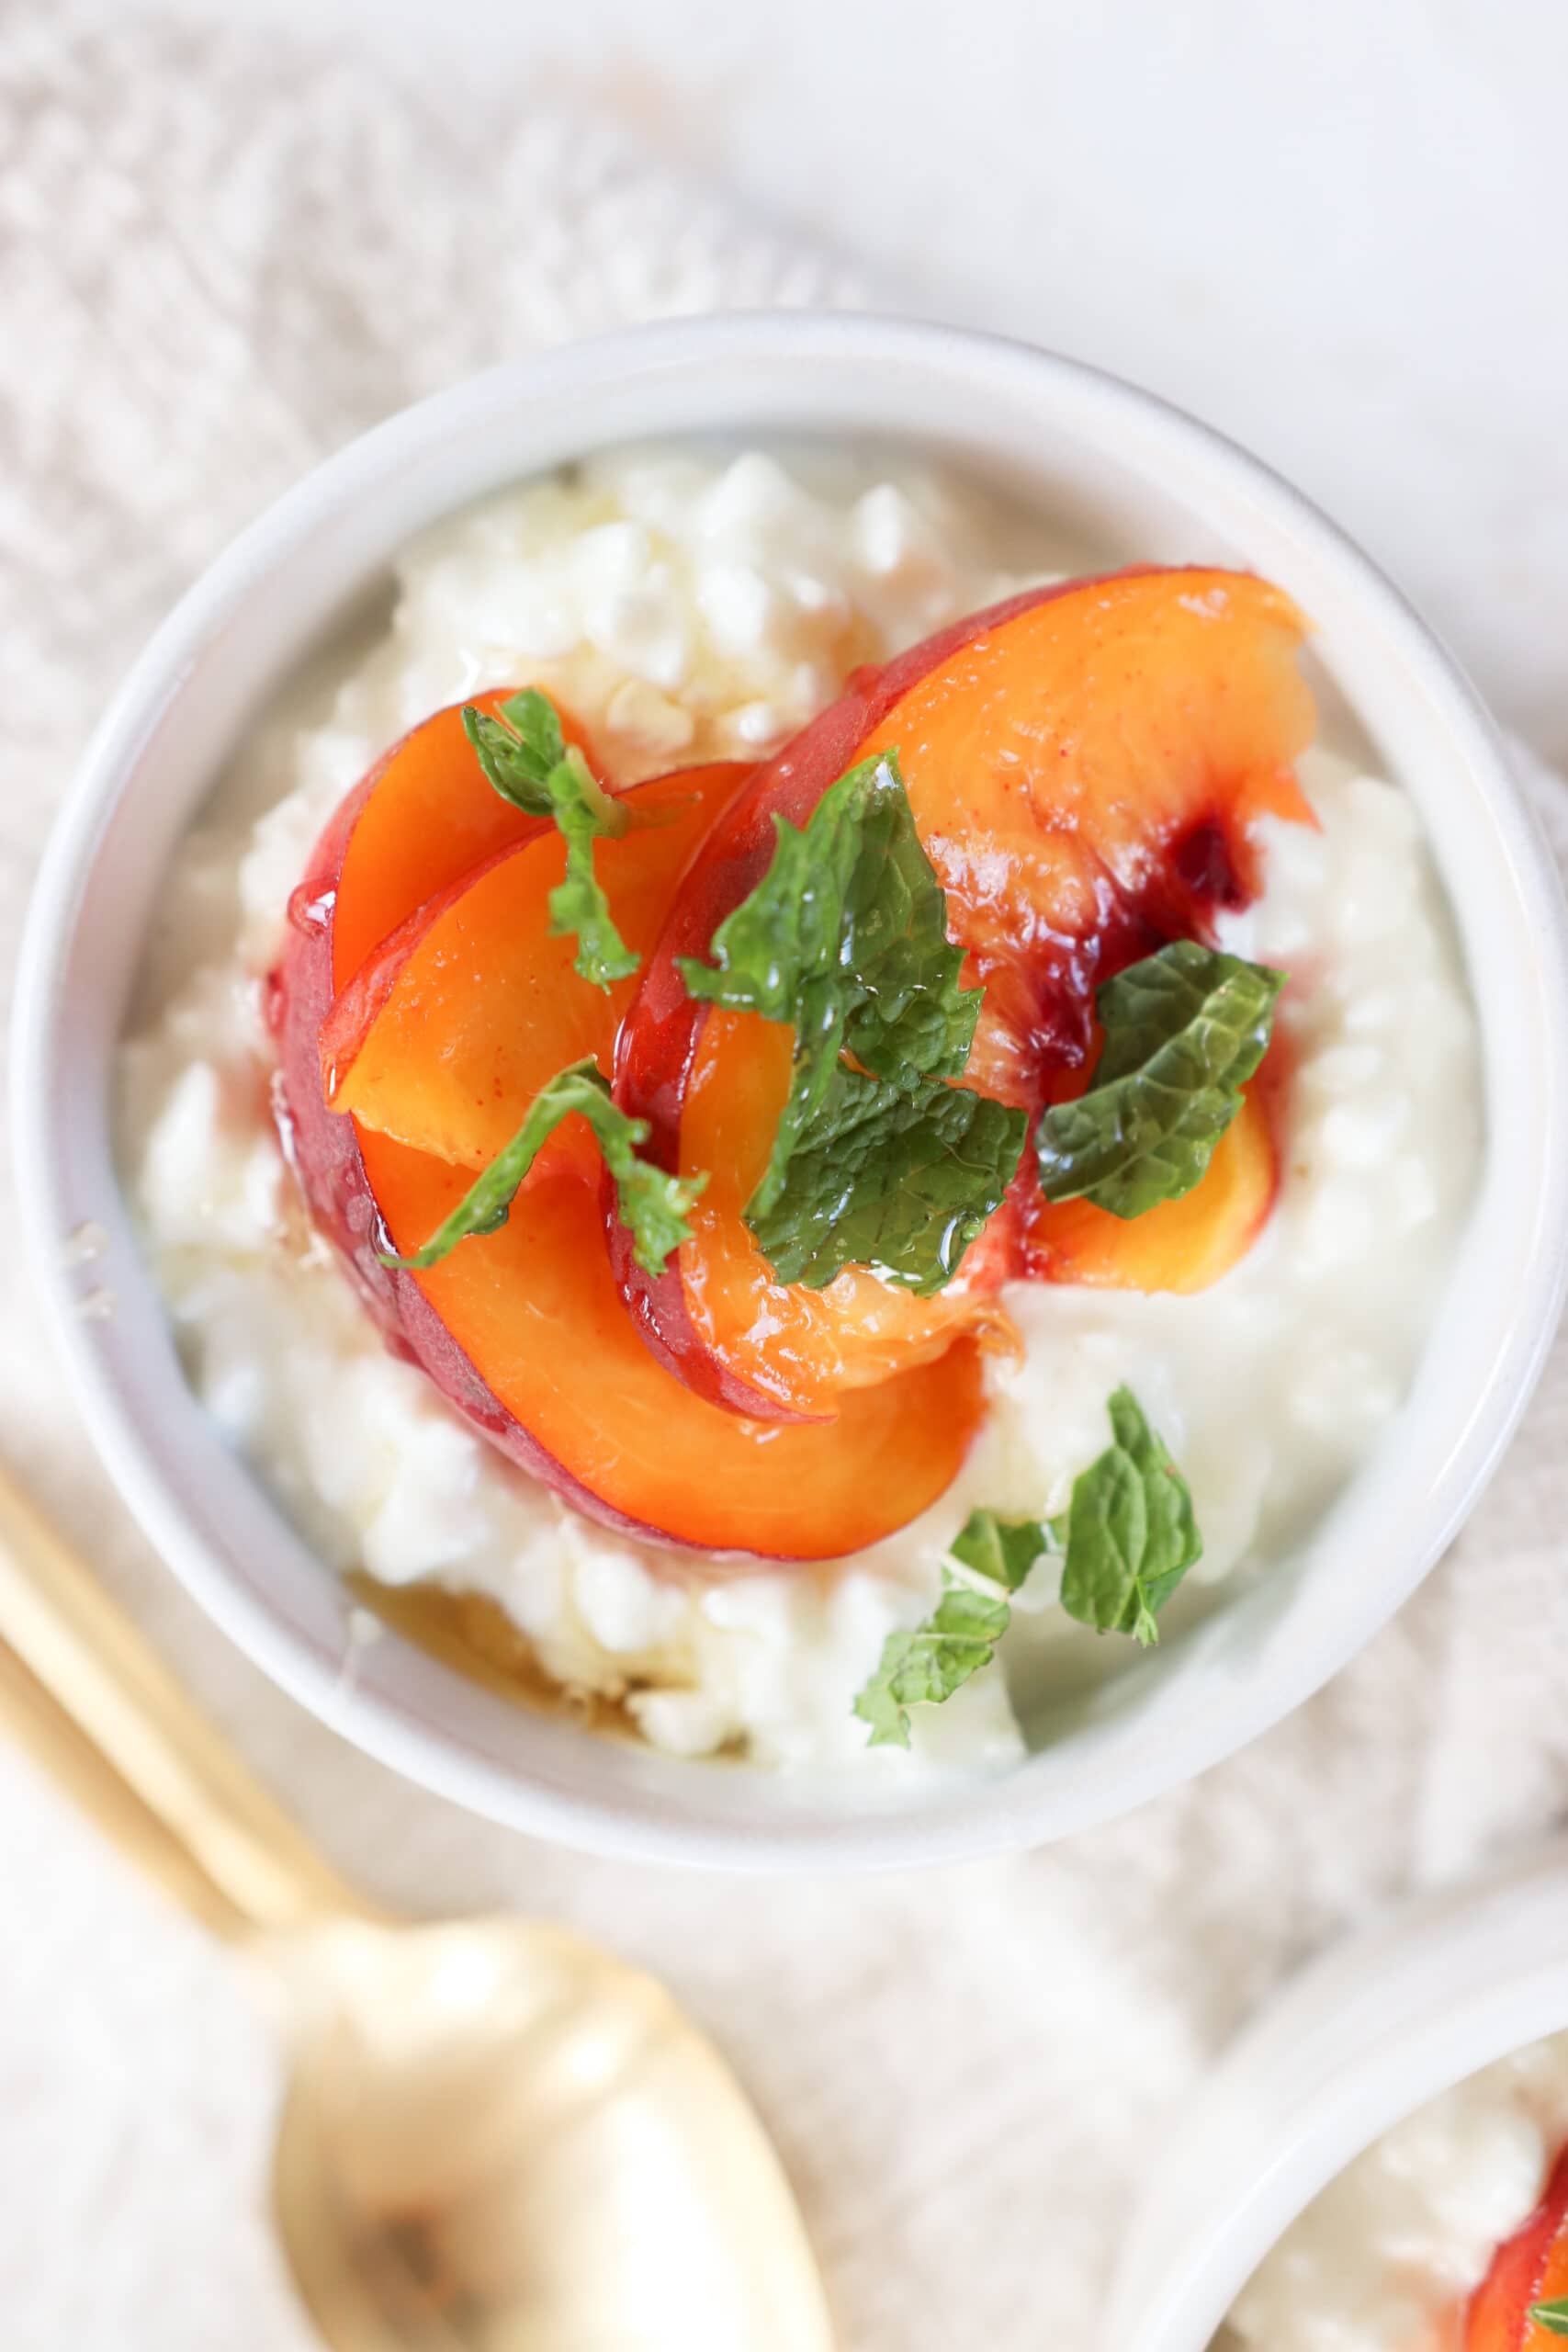 https://www.lindsaypleskot.com/wp-content/uploads/2023/08/cottage-cheese-and-fruit-in-a-bowl-topped-with-mint-scaled.jpg